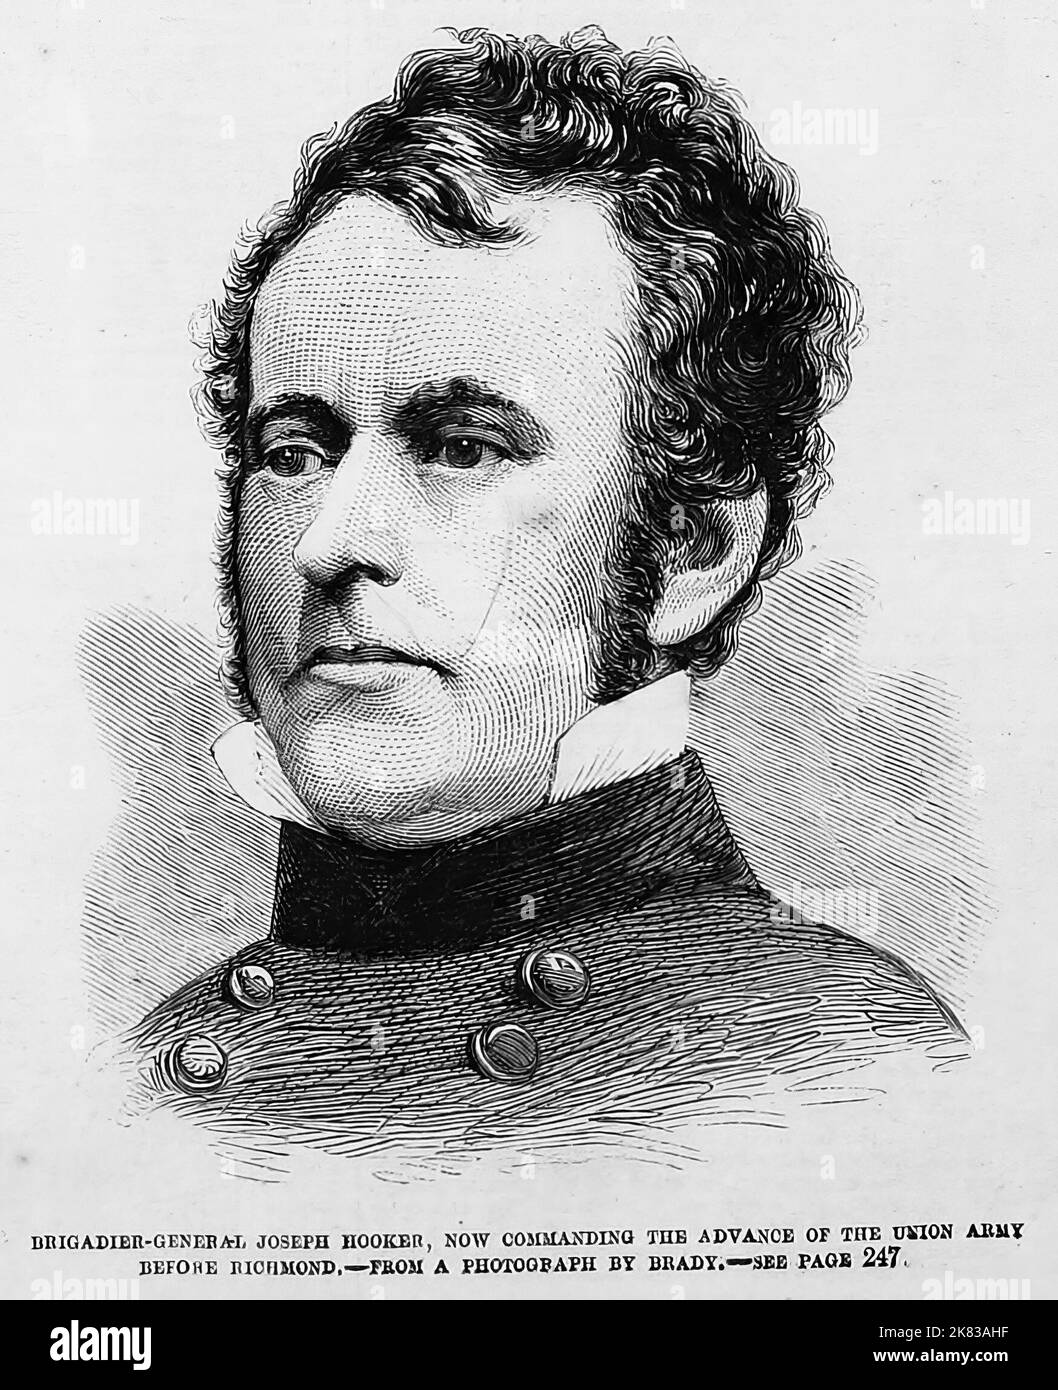 Portrait of Brigadier General Joseph Hooker, now commanding the advance of the Union Army before Richmond. 1862. 19th century American Civil War illustration from Frank Leslie's Illustrated Newspaper Stock Photo